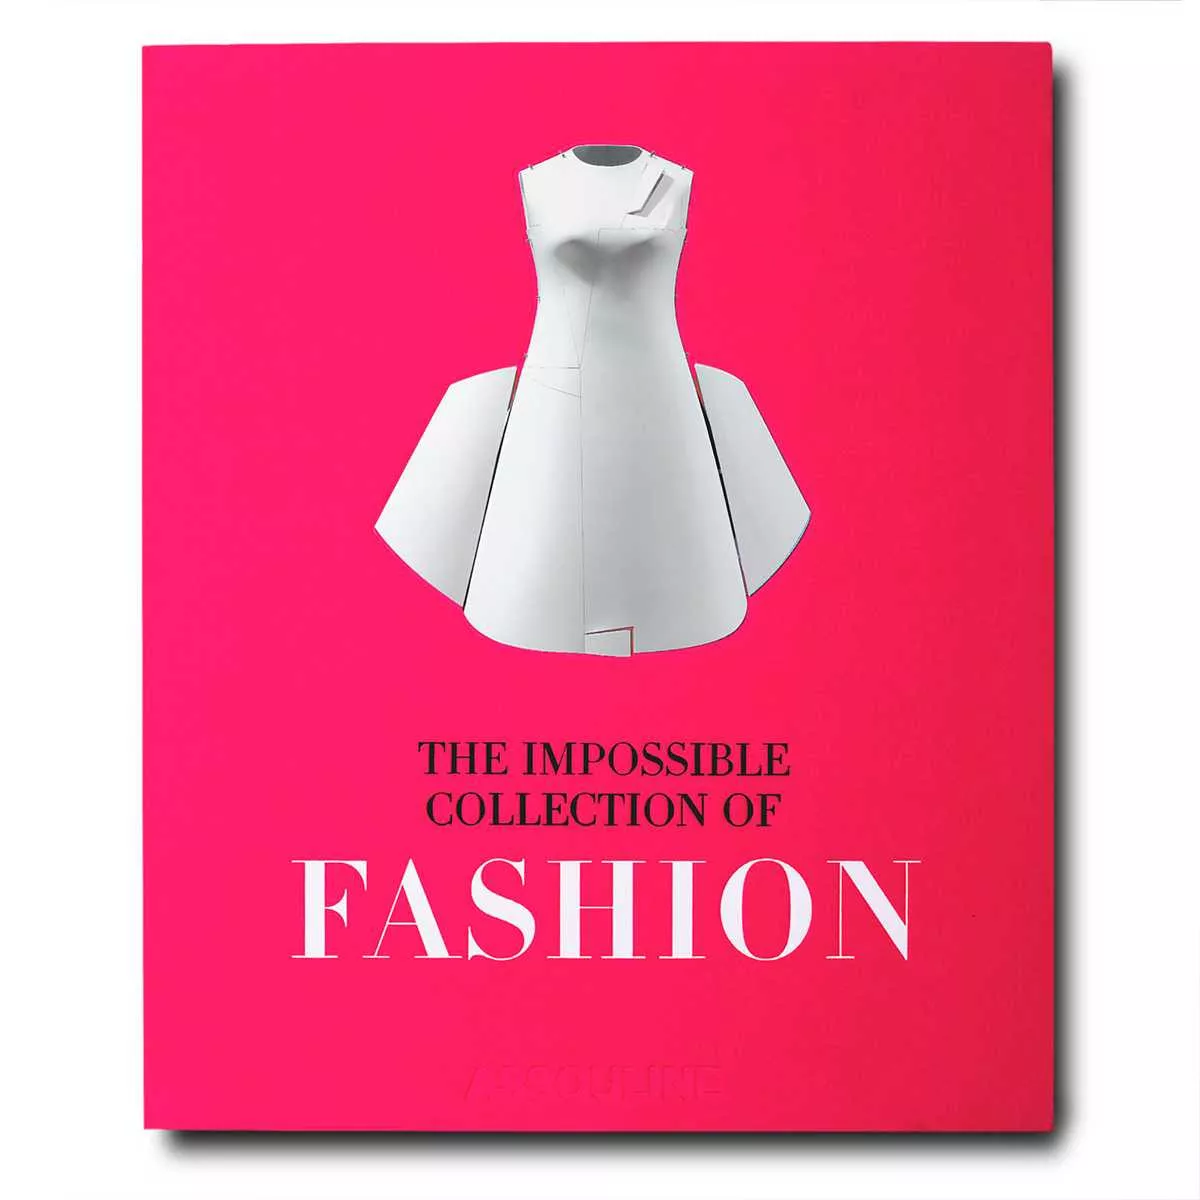 Книга "The Impossible Collection of Fashion" Assouline Collection (9781614280163) - Фото nav 1